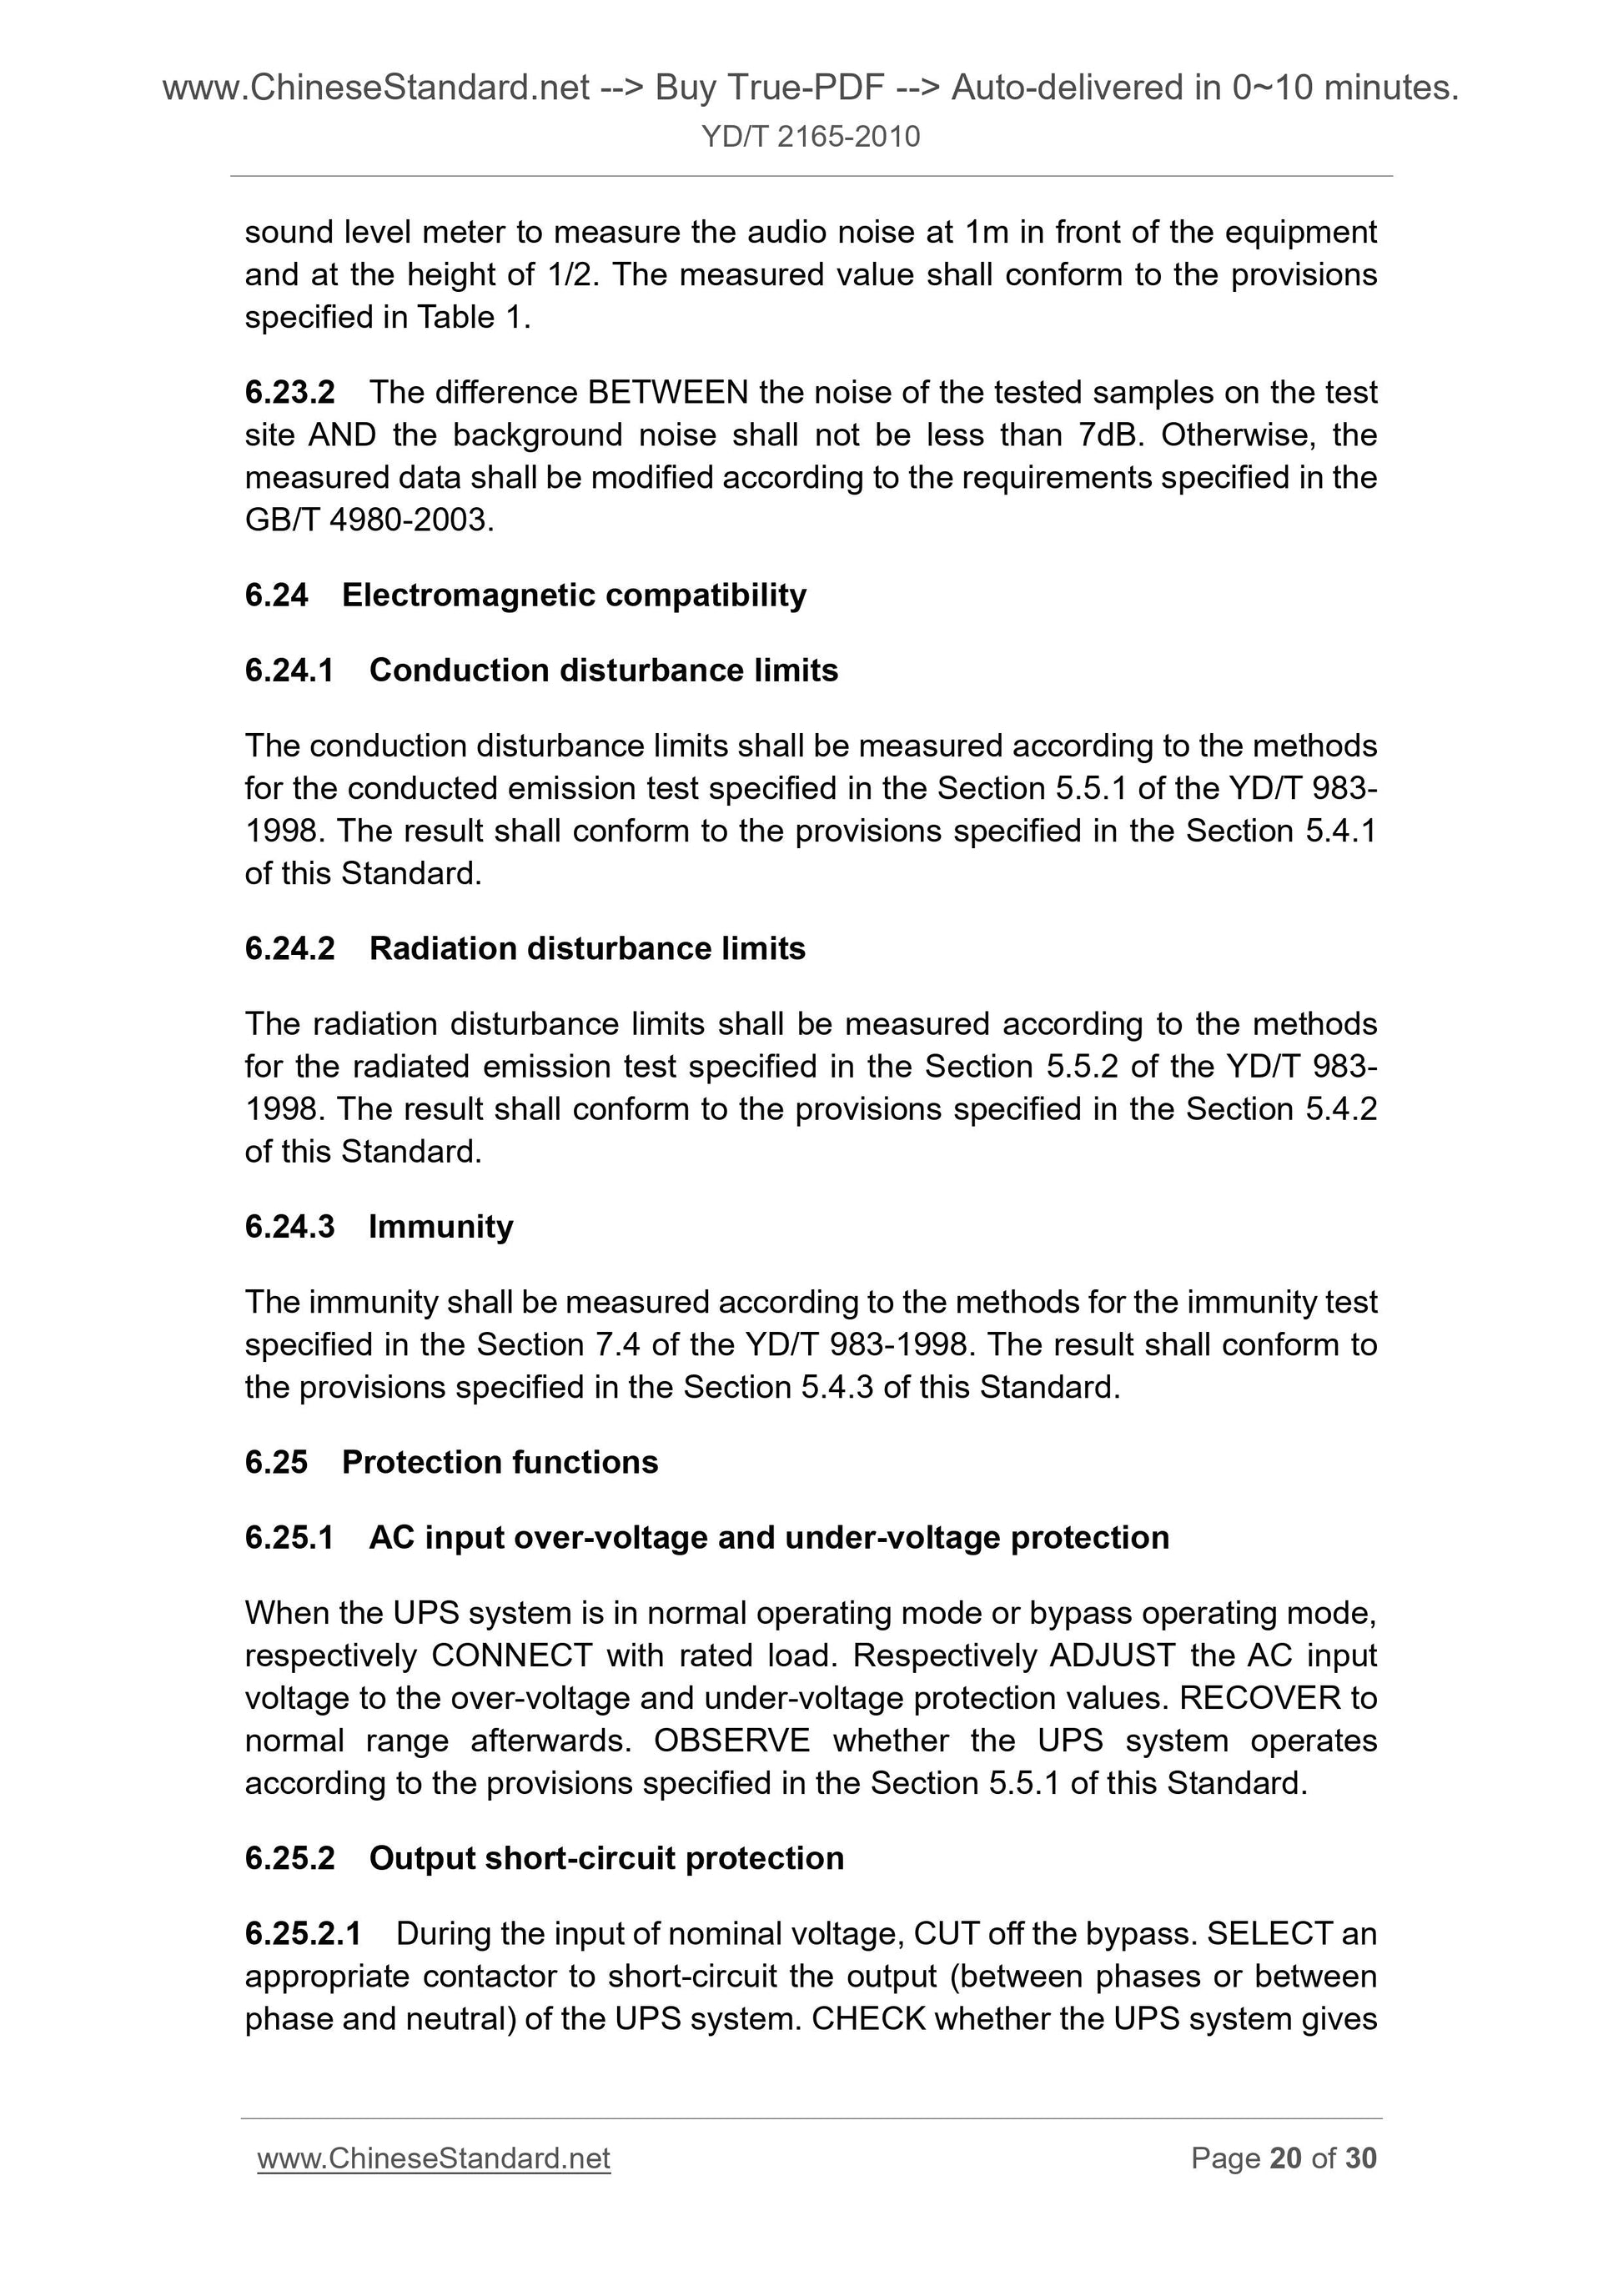 YD/T 2165-2010 Page 9